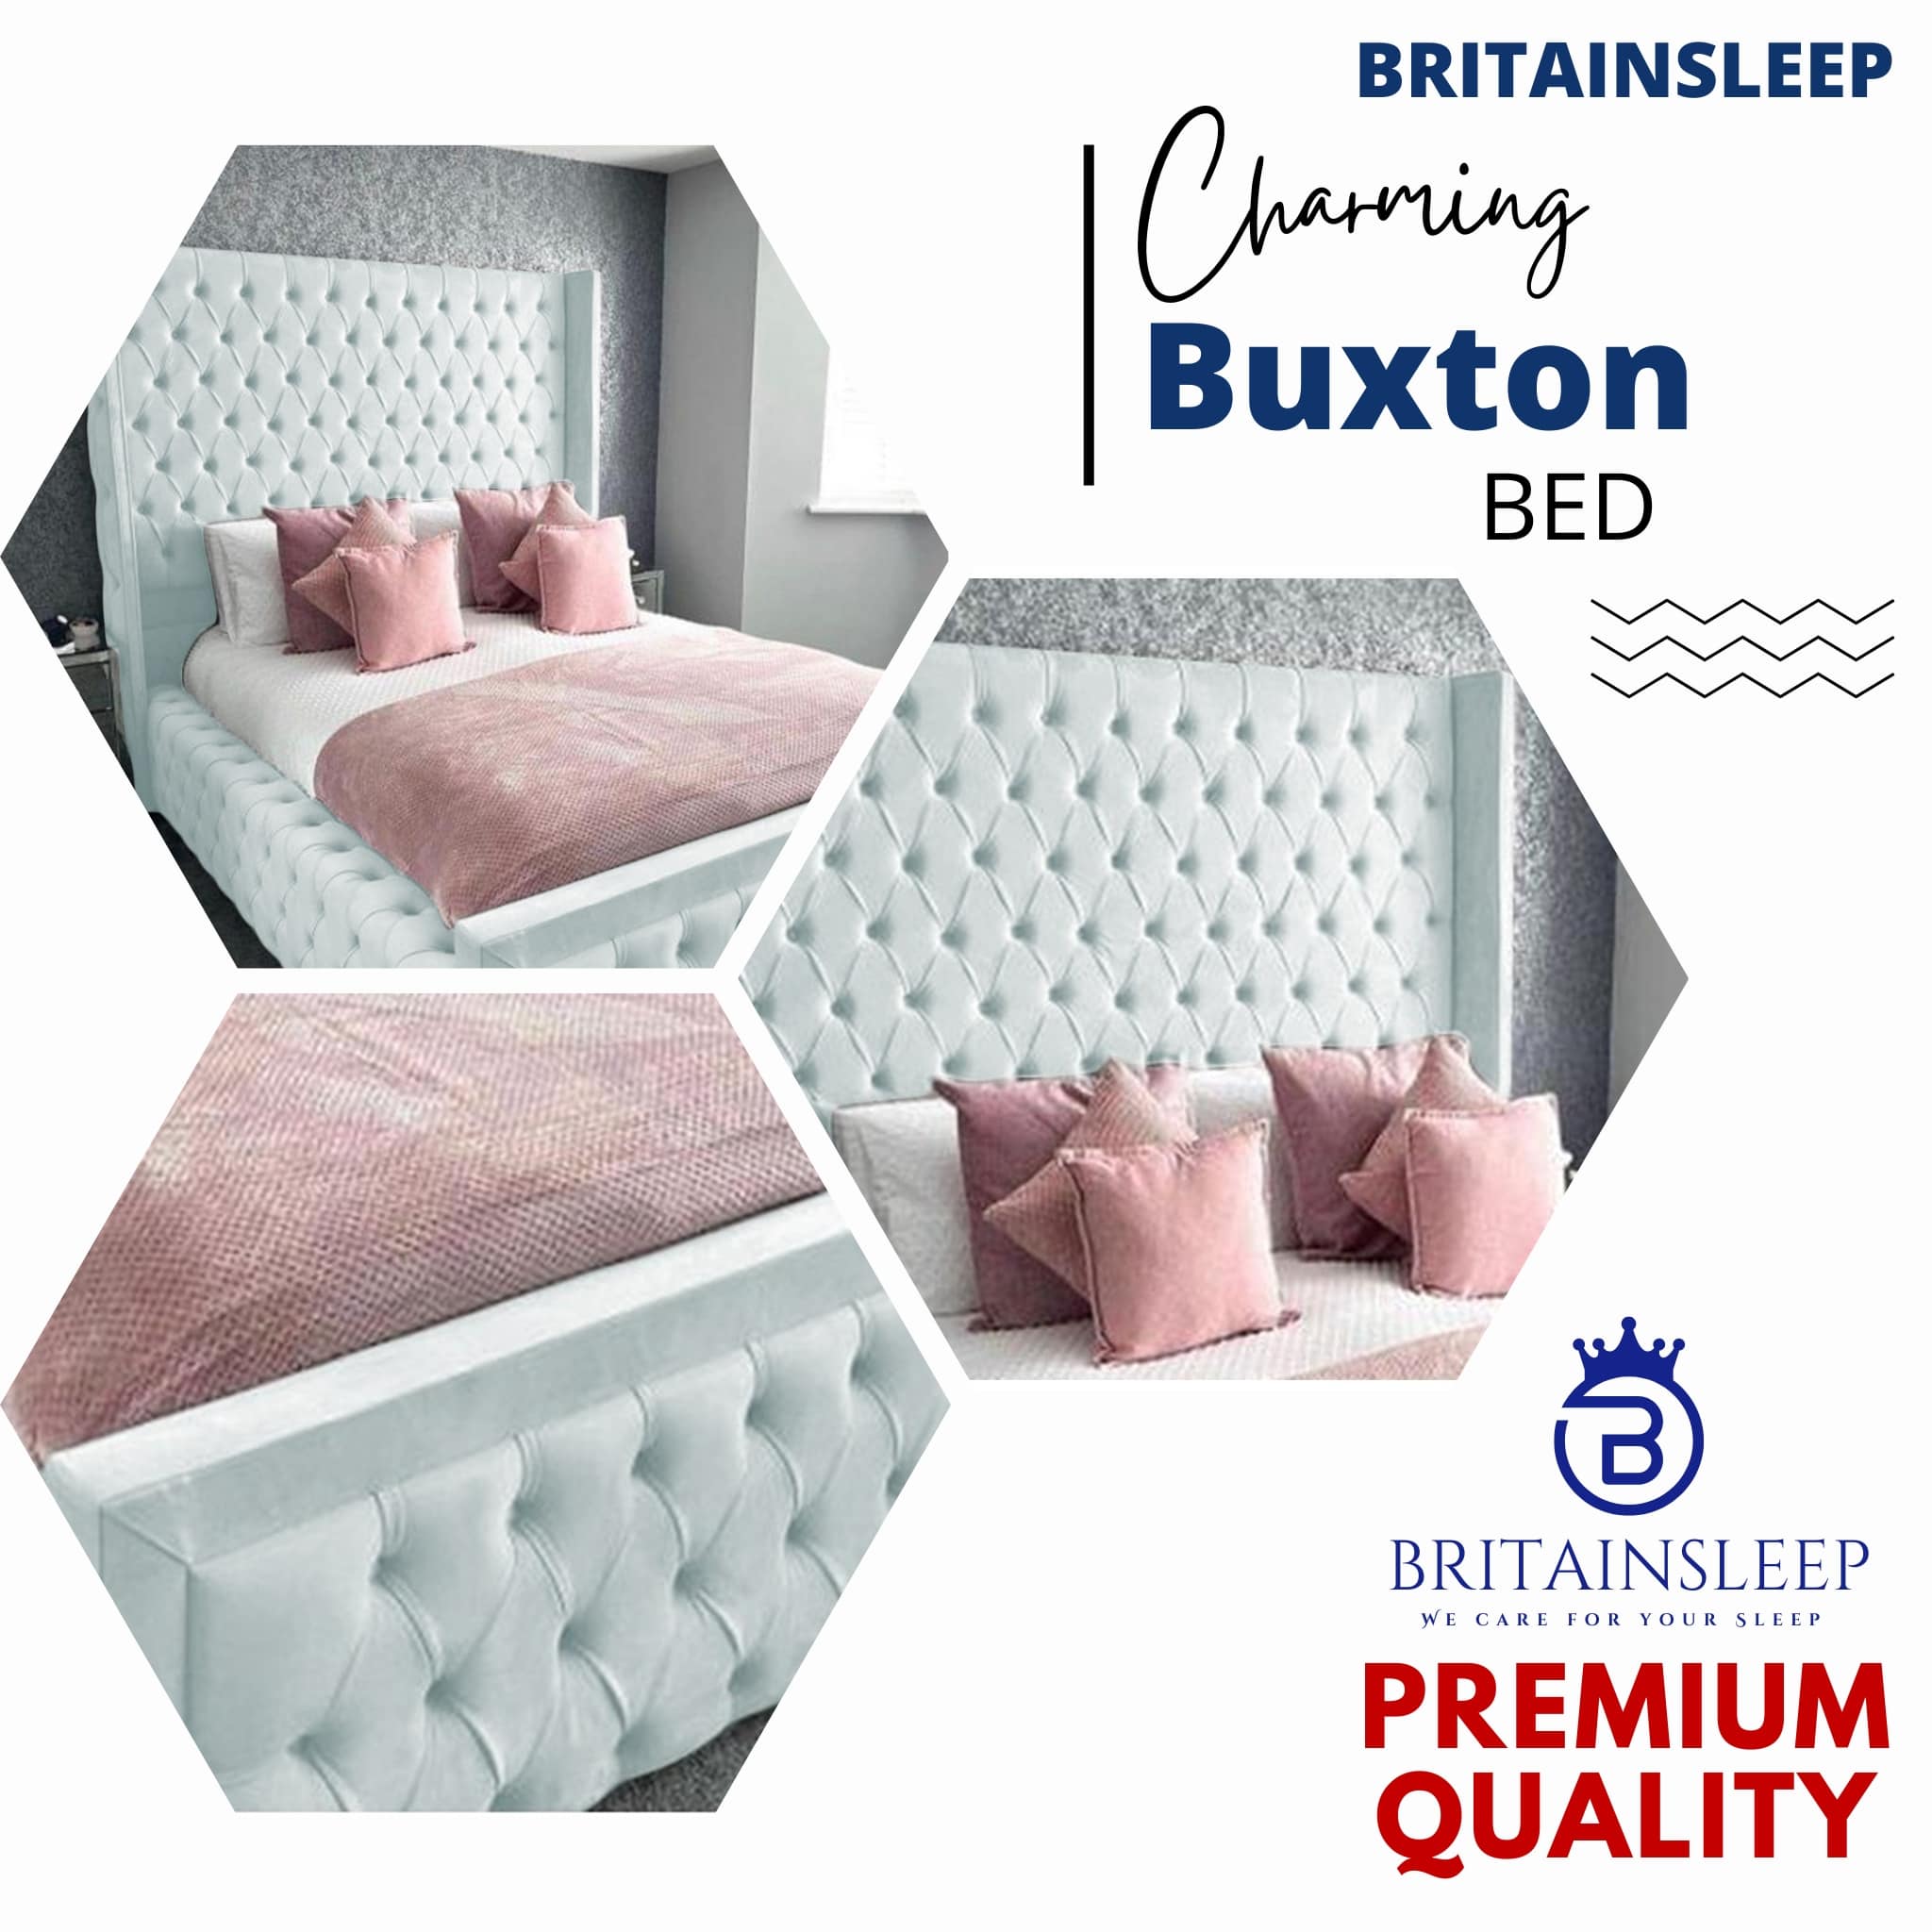 60'' Luxury Buxton Winged Upholstered Bed Frame with Ottoman Storage Britainsleep